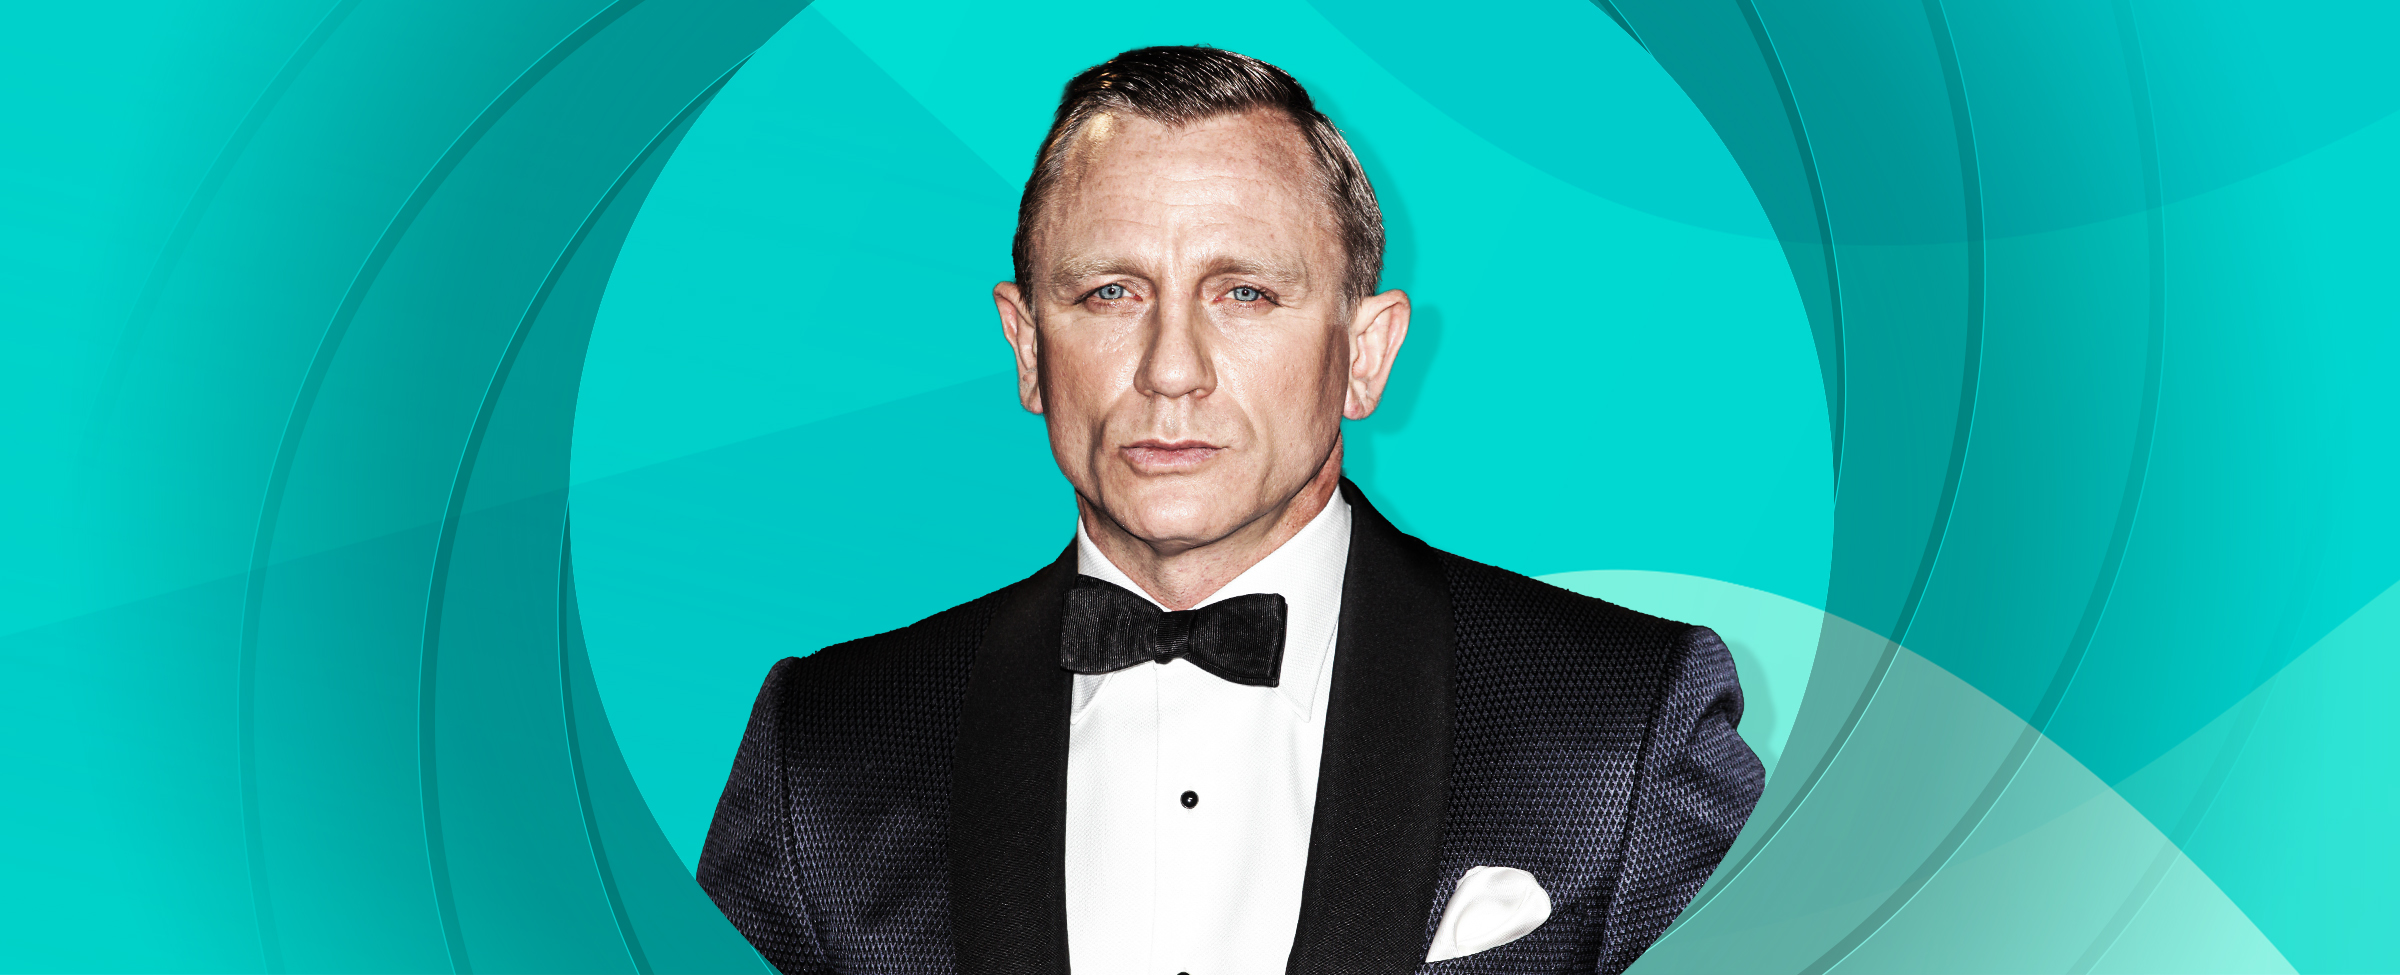 Daniel Craig, wearing a suit and bow tie takes center image, set against a teal blue background.